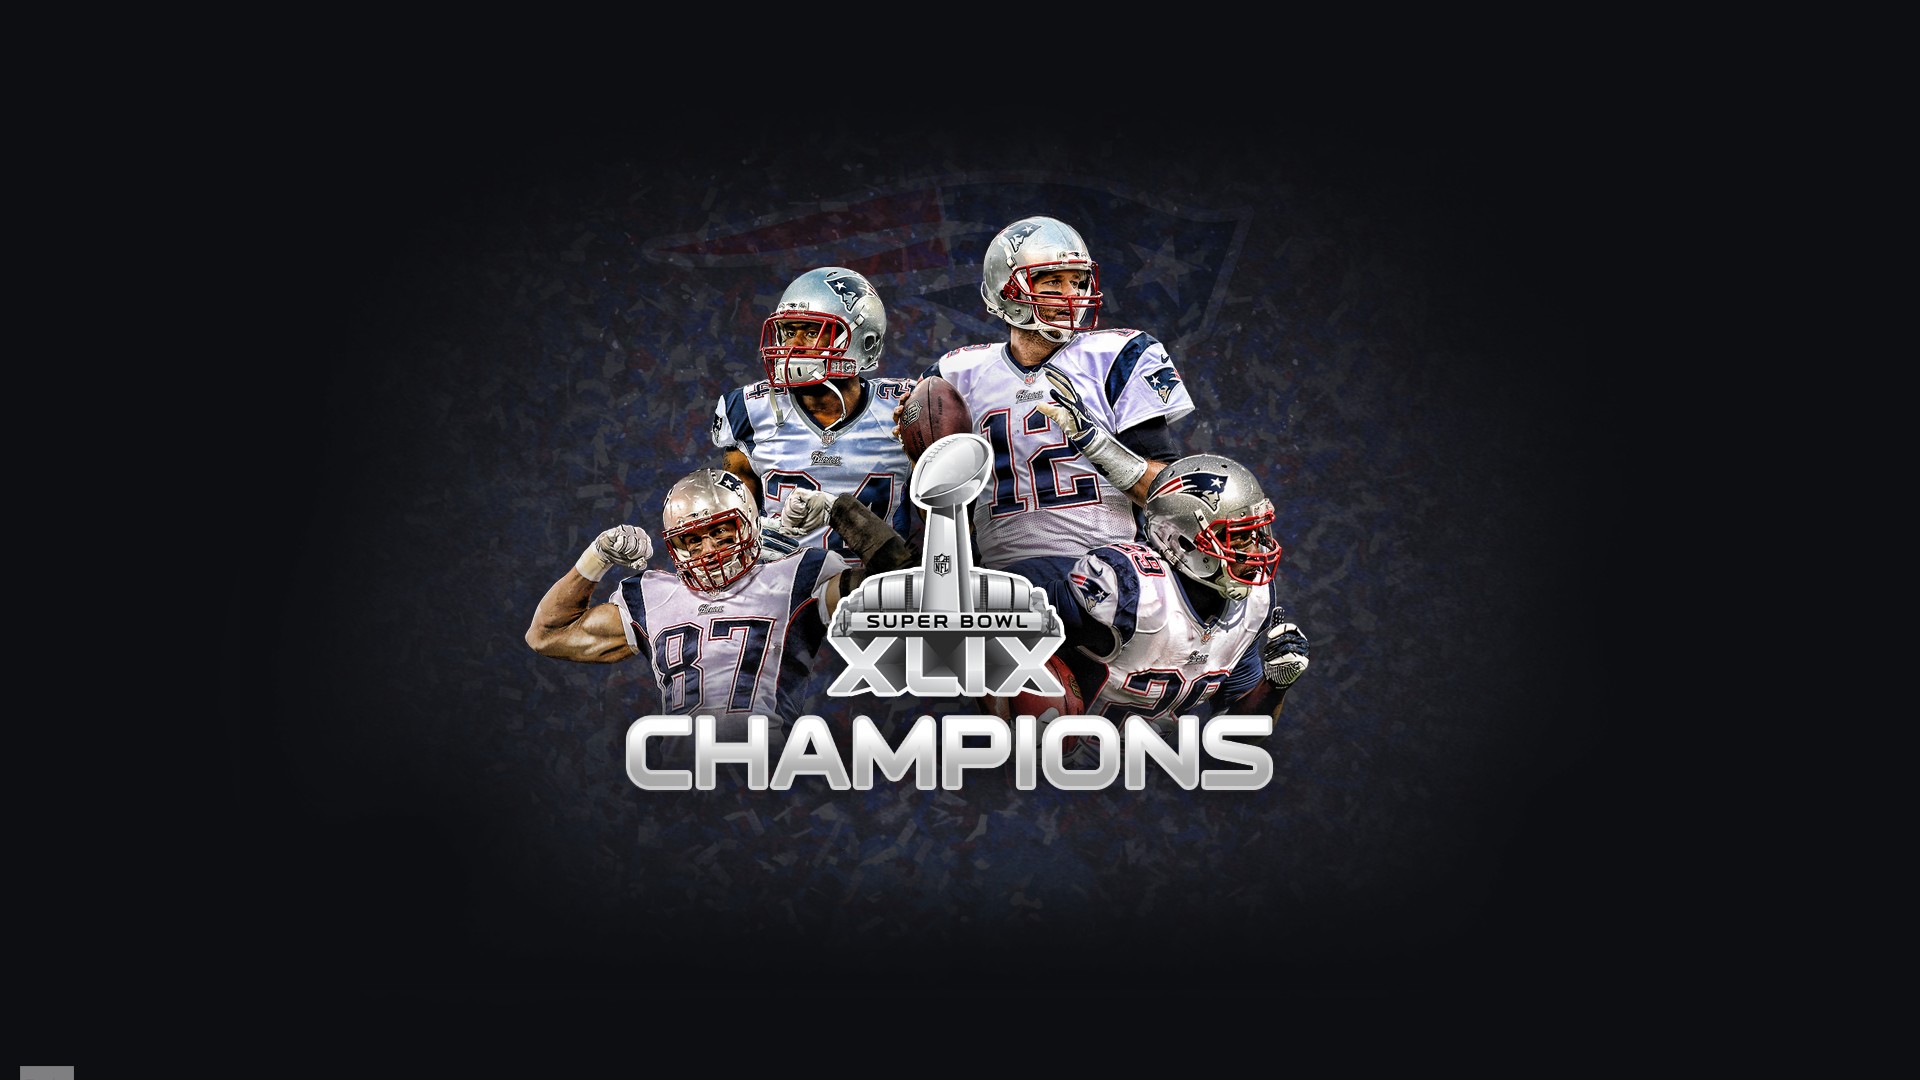 HD New England Patriots Backgrounds With Resolution 1920X1080 pixel. You can make this wallpaper for your Mac or Windows Desktop Background, iPhone, Android or Tablet and another Smartphone device for free